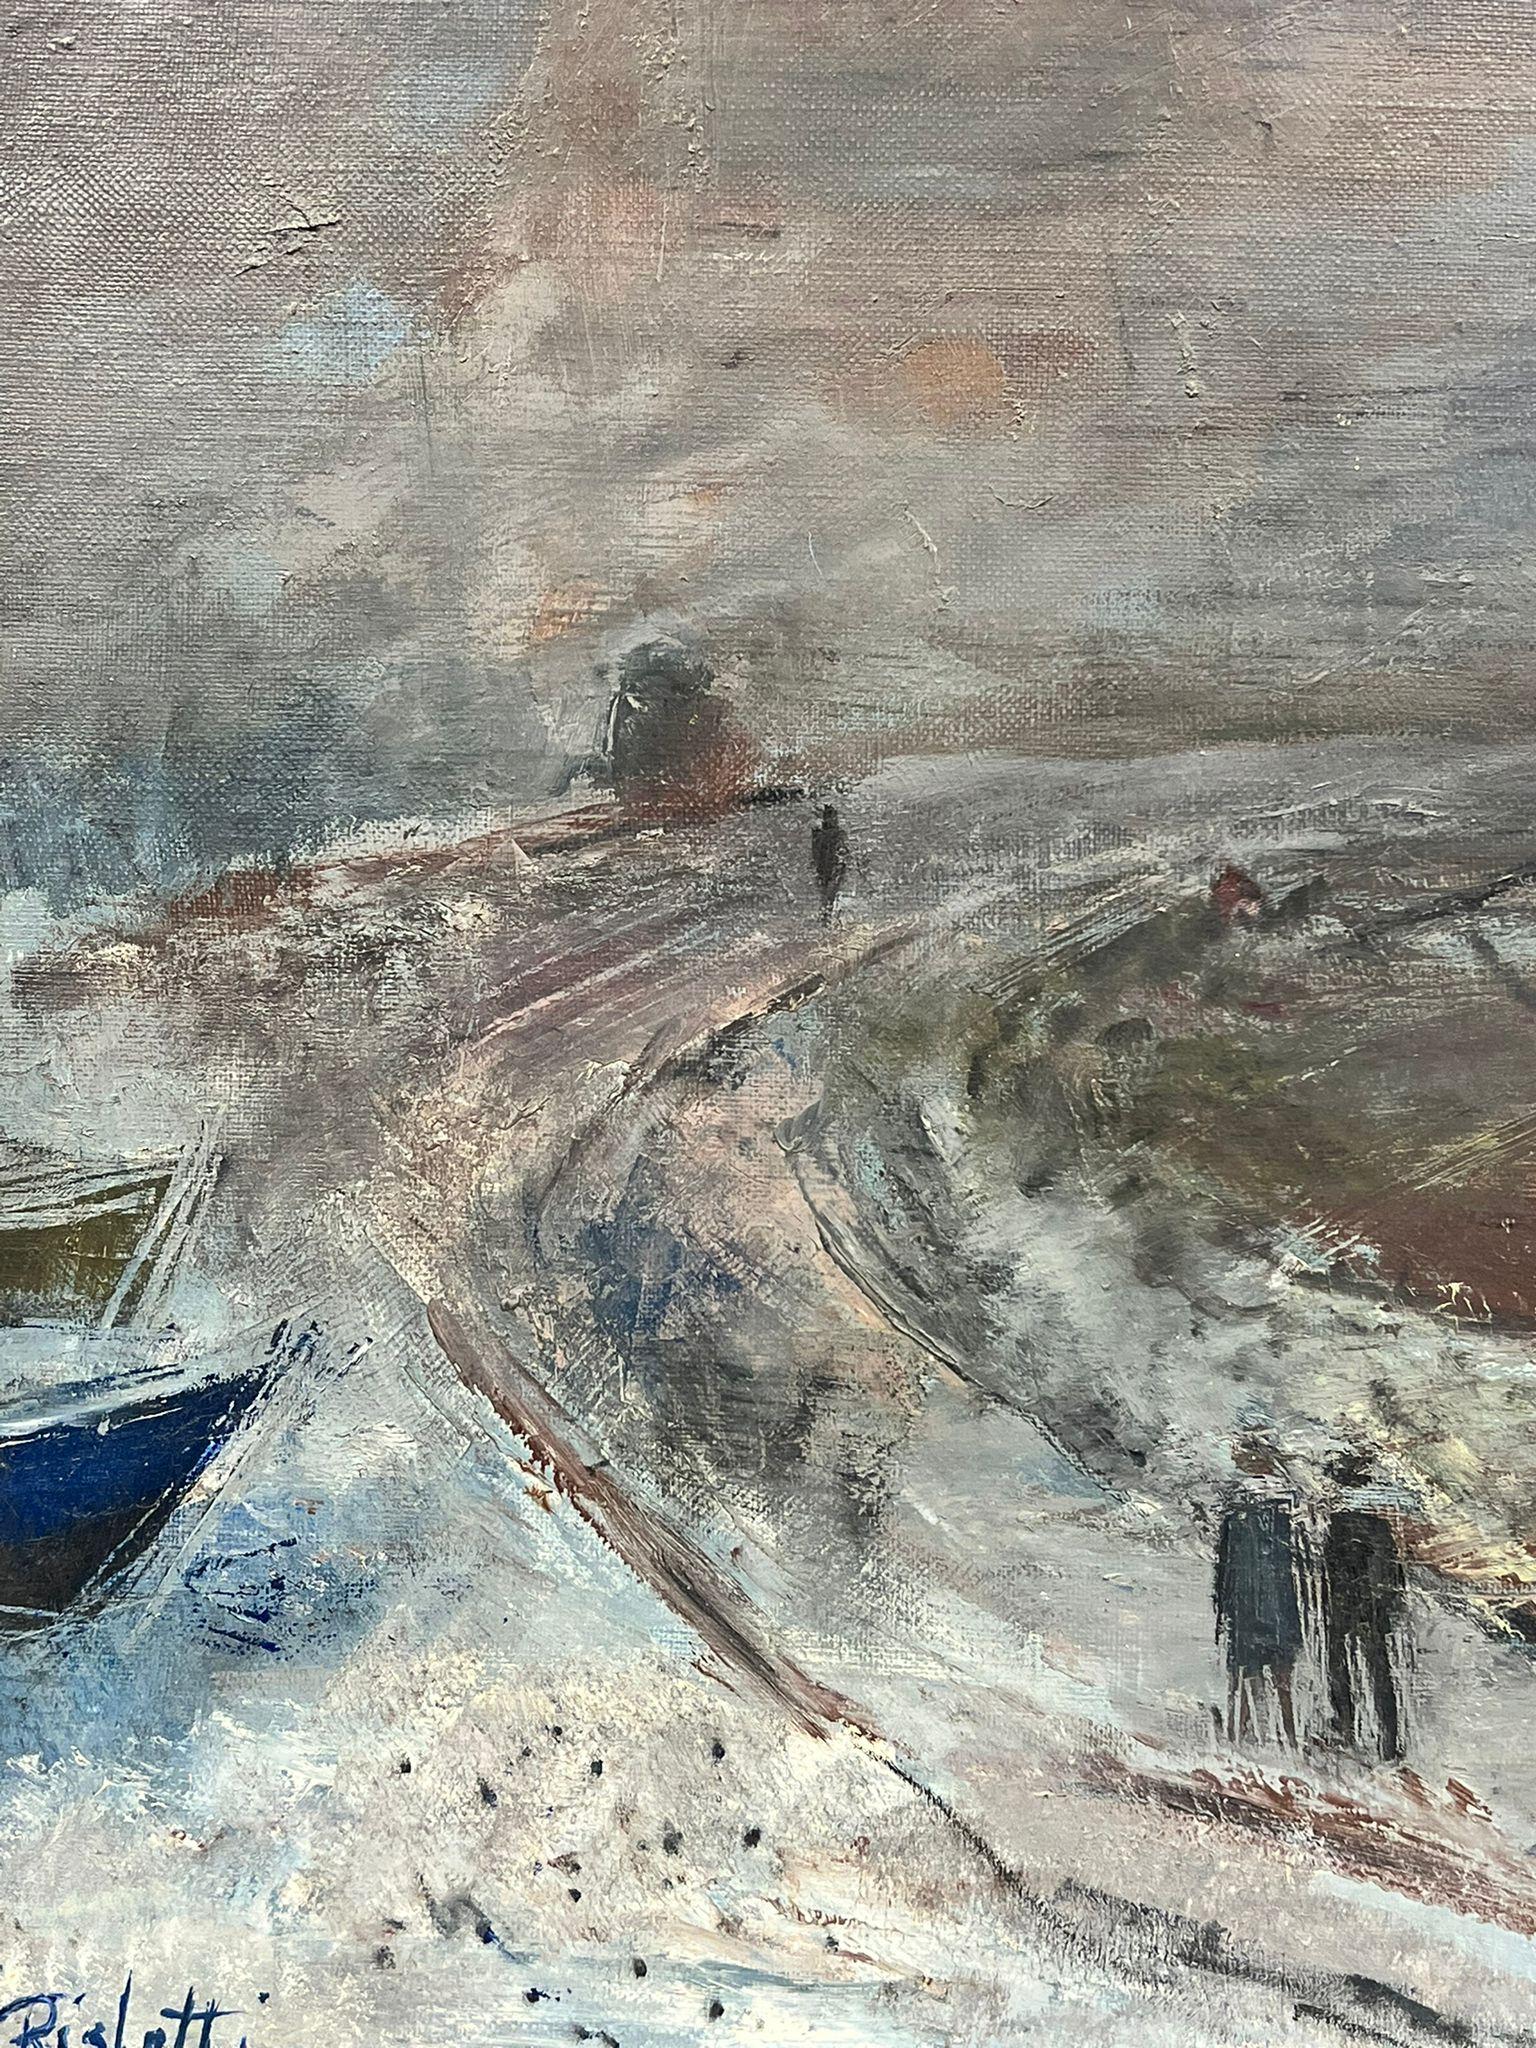 Etretat
signed by Édouard Righetti (1924-2001)
Inscribed Verso on back
dated 1974

oil painted on canvas, beautifully painted.
very good condition
size: 25.5 x inches x 21 inches, unframed
provenance: all the paintings we have for sale by this